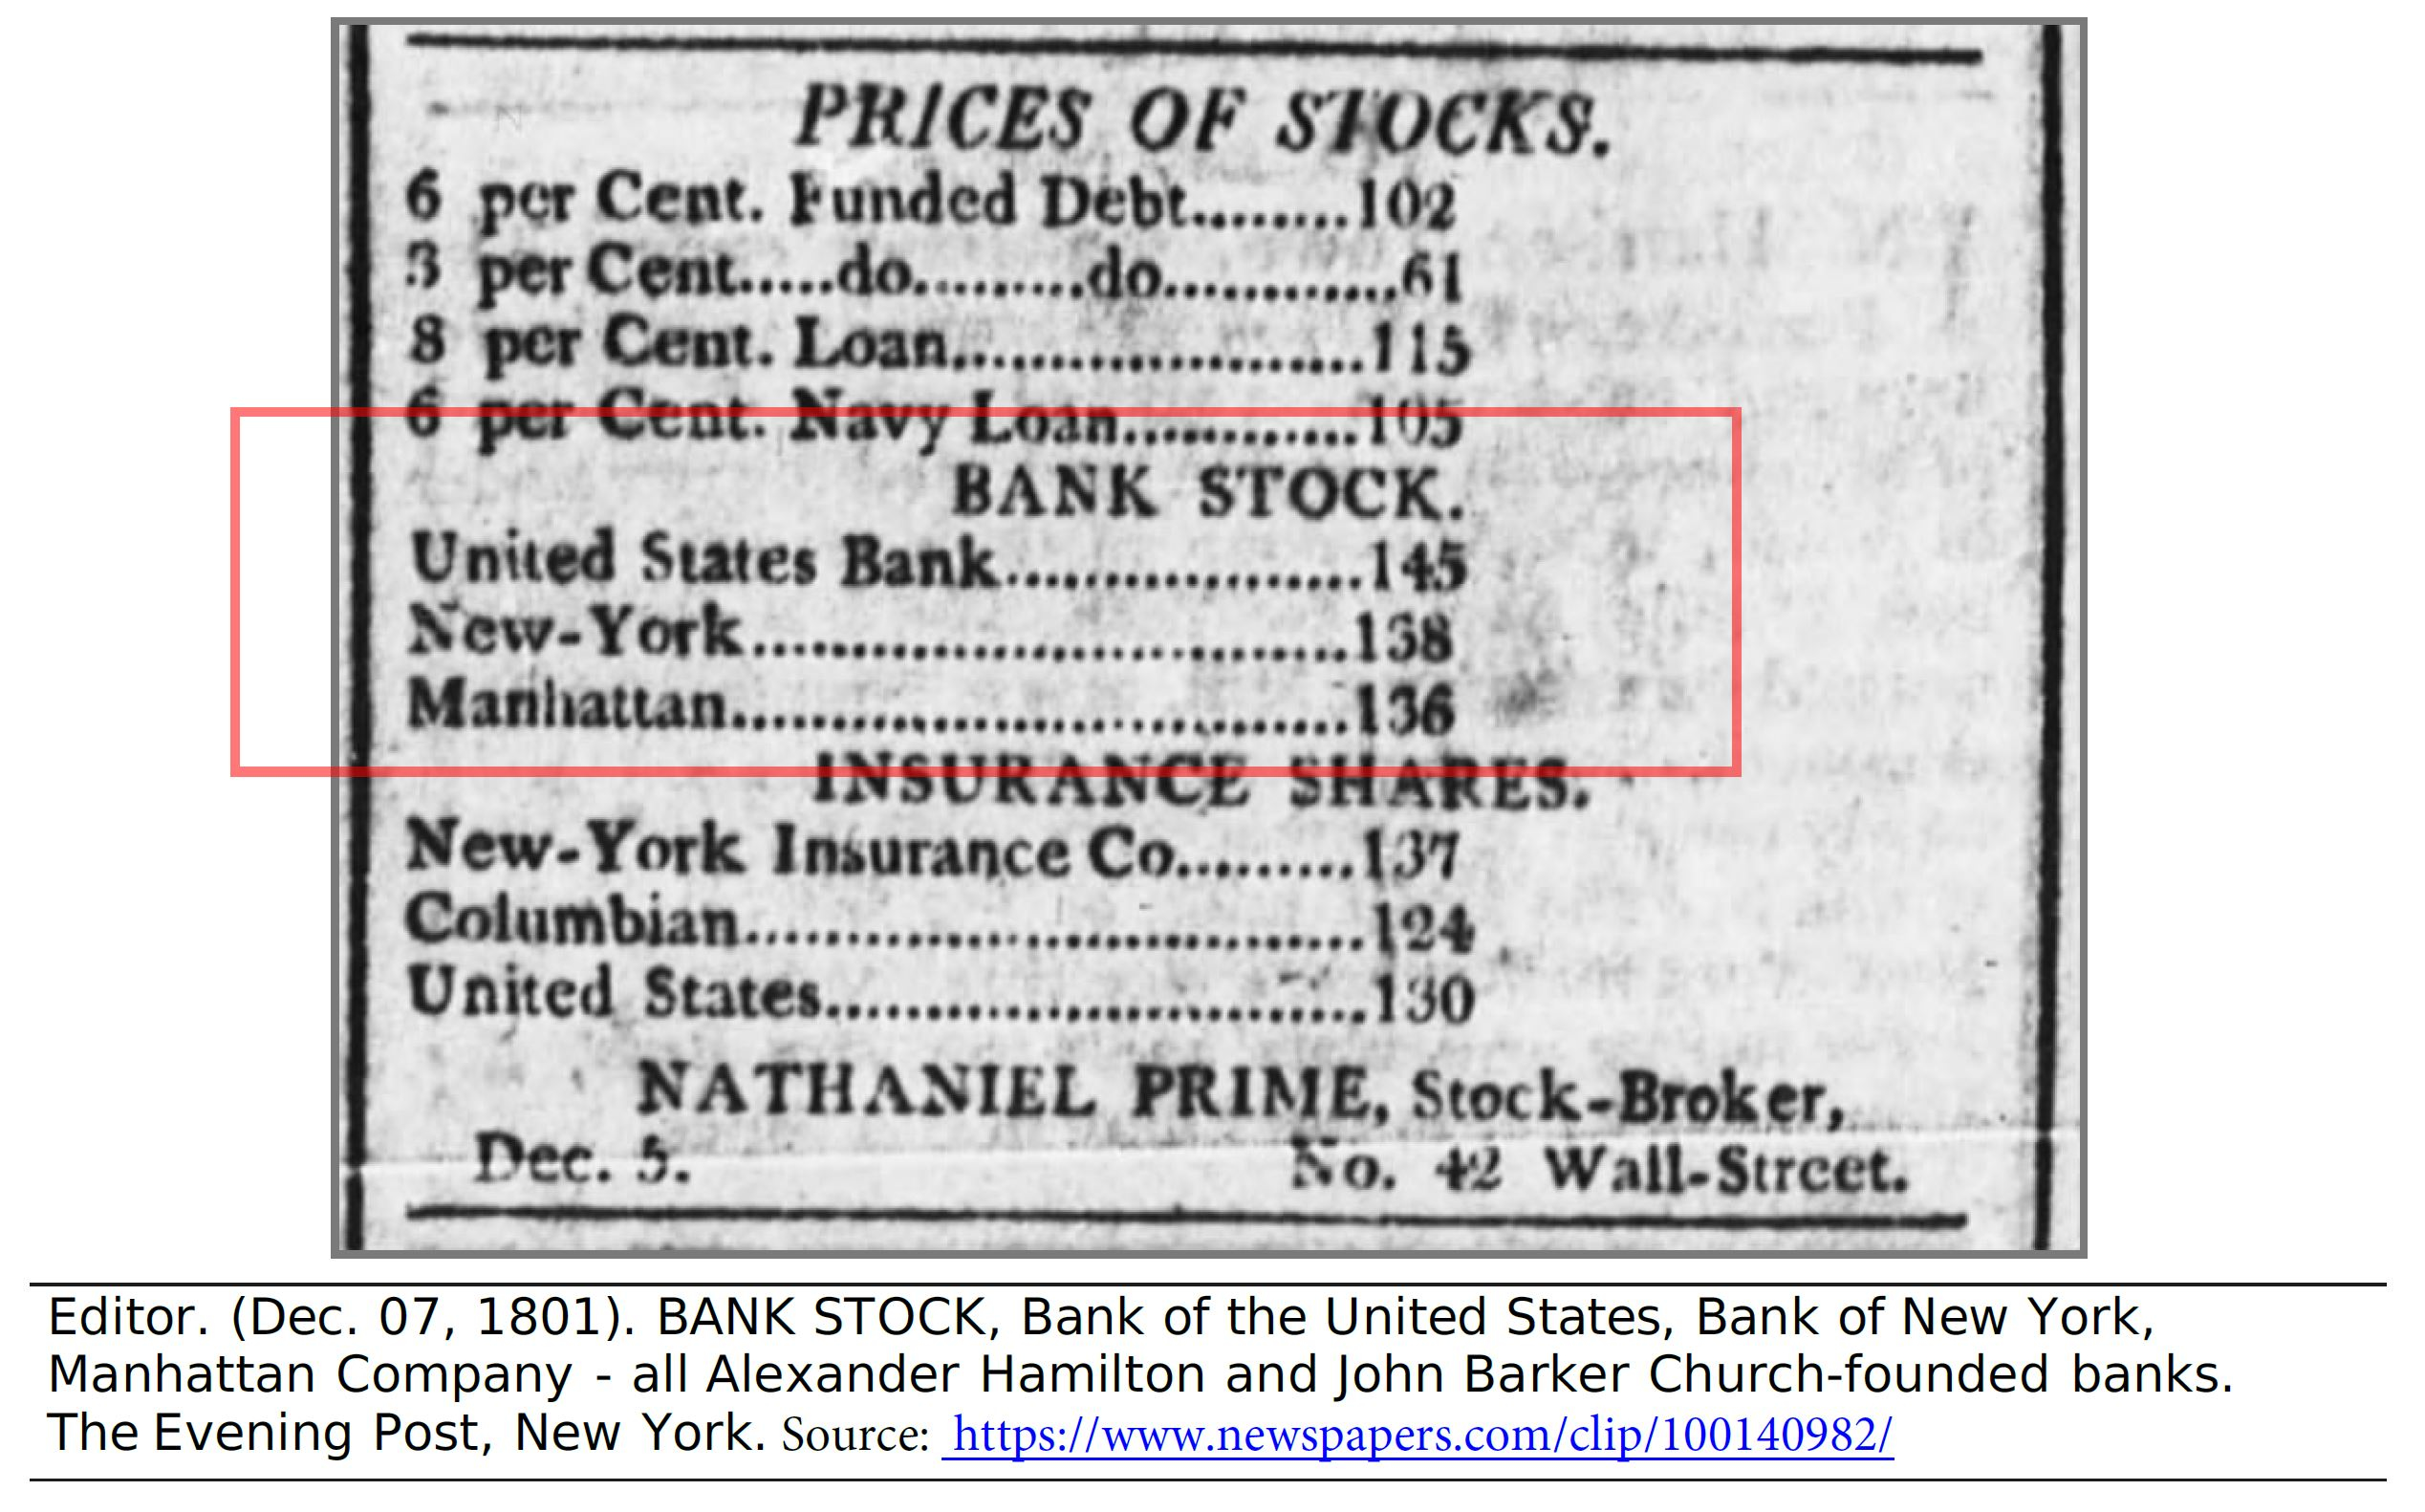 Editor. (Dec. 07, 1801). BANK STOCK, Bank of the United States, Bank of New York, Manhattan Company - all Alexander Hamilton and John Barker Church-founded banks. The Evening Post, New York.